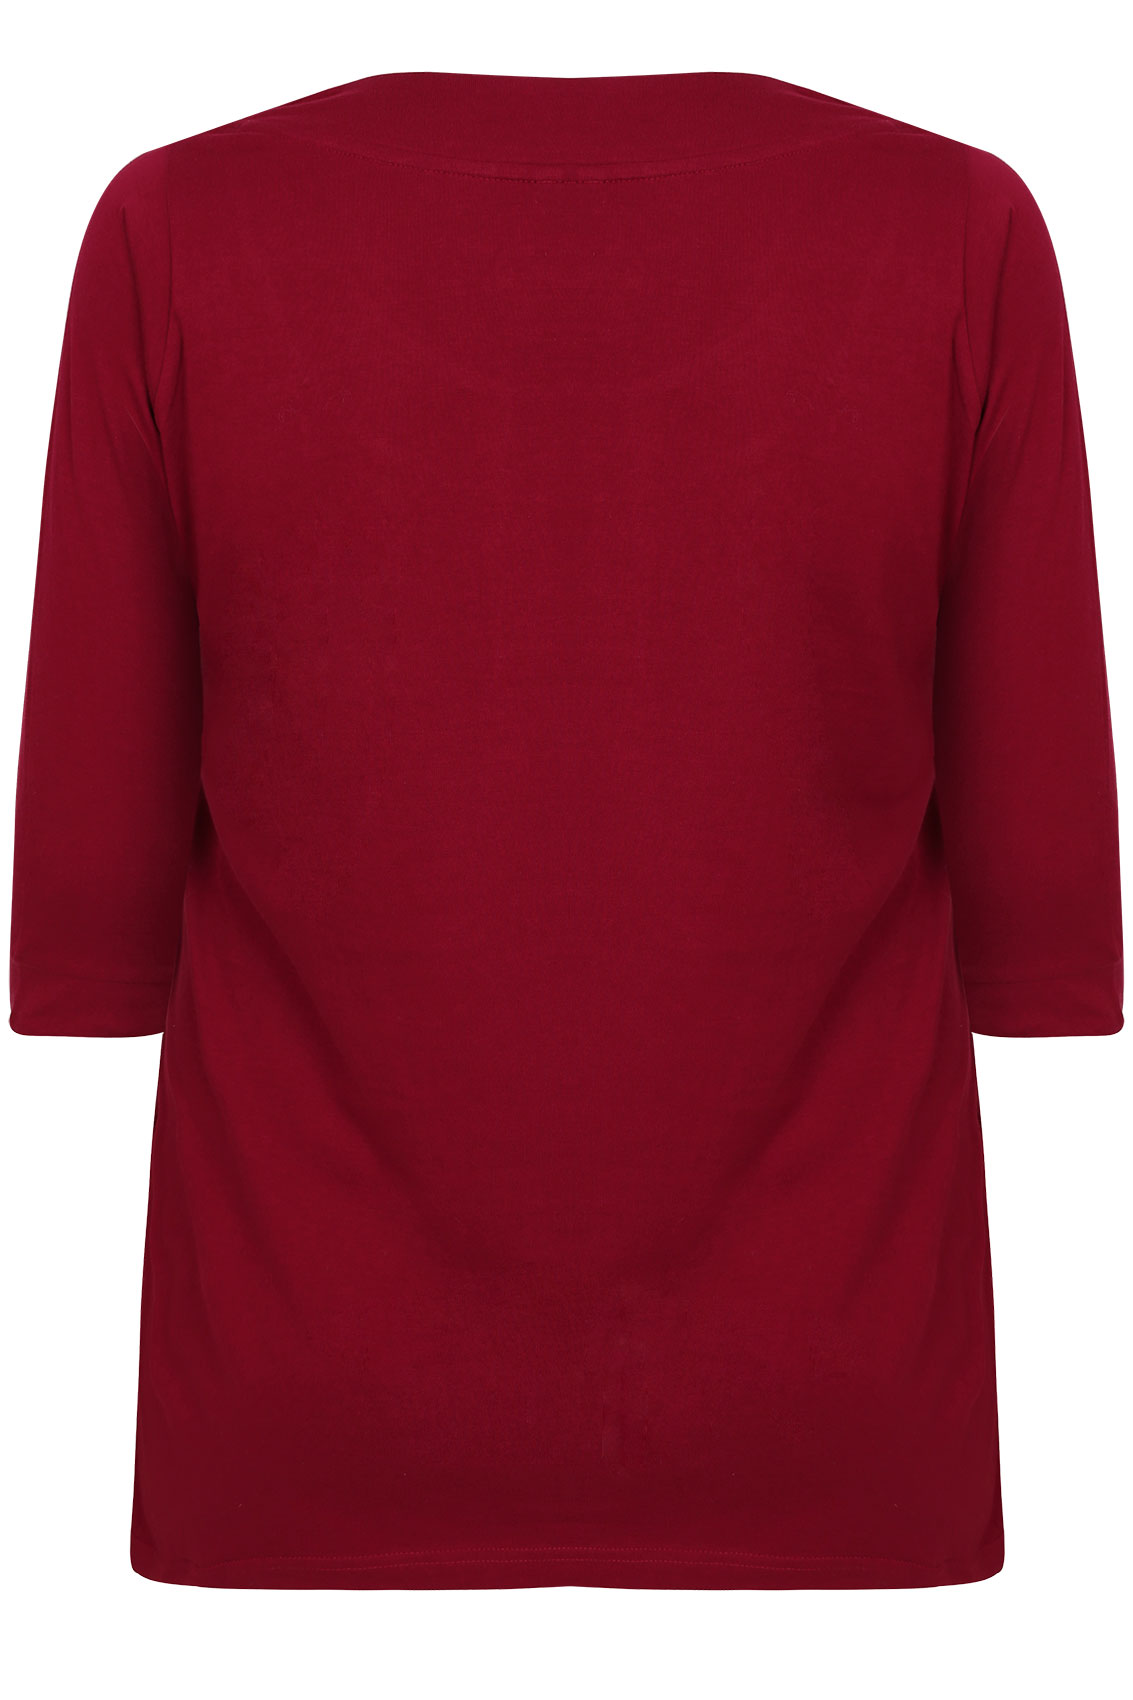 Red Band Scoop Neckline T-Shirt With 3/4 Sleeves plus Size 16 to 32